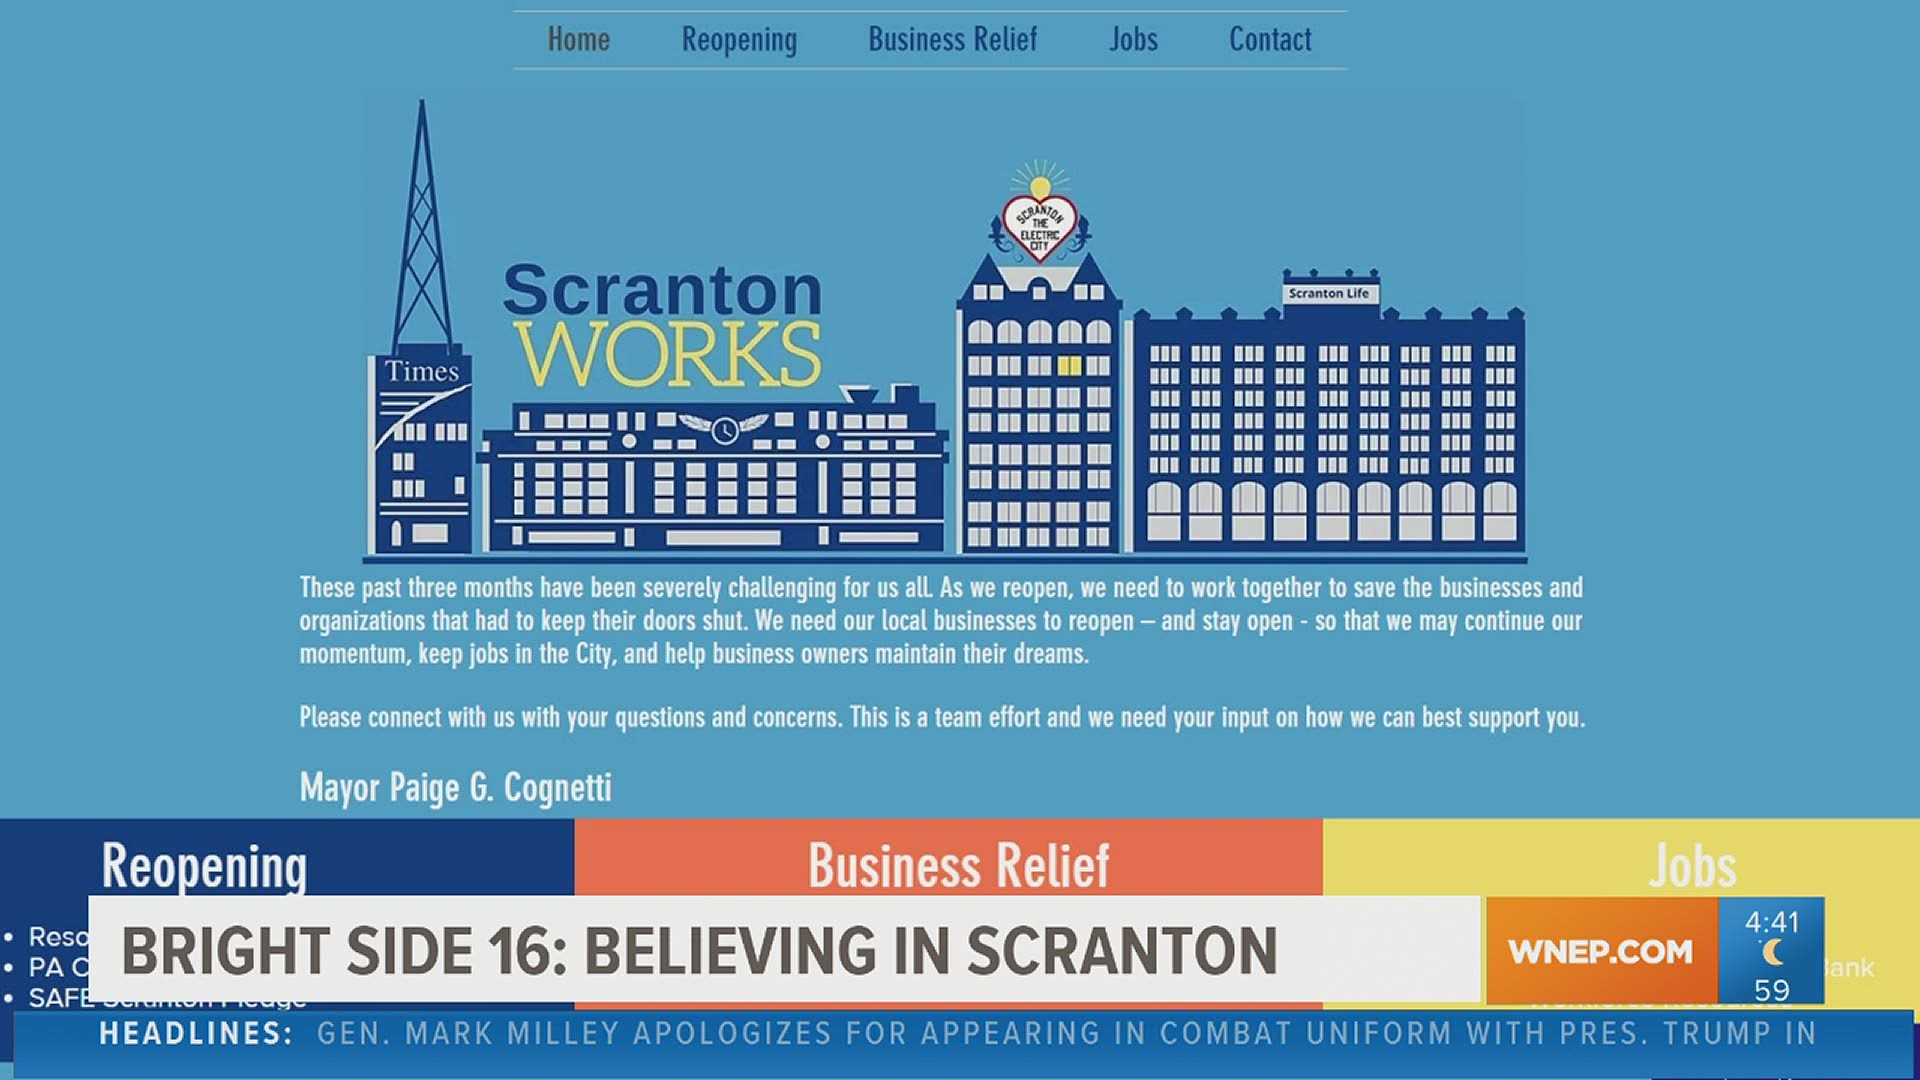 From help paying bills to navigating the unemployment process, the city of Scranton has launched a new site that could help small businesses get back on their feet.